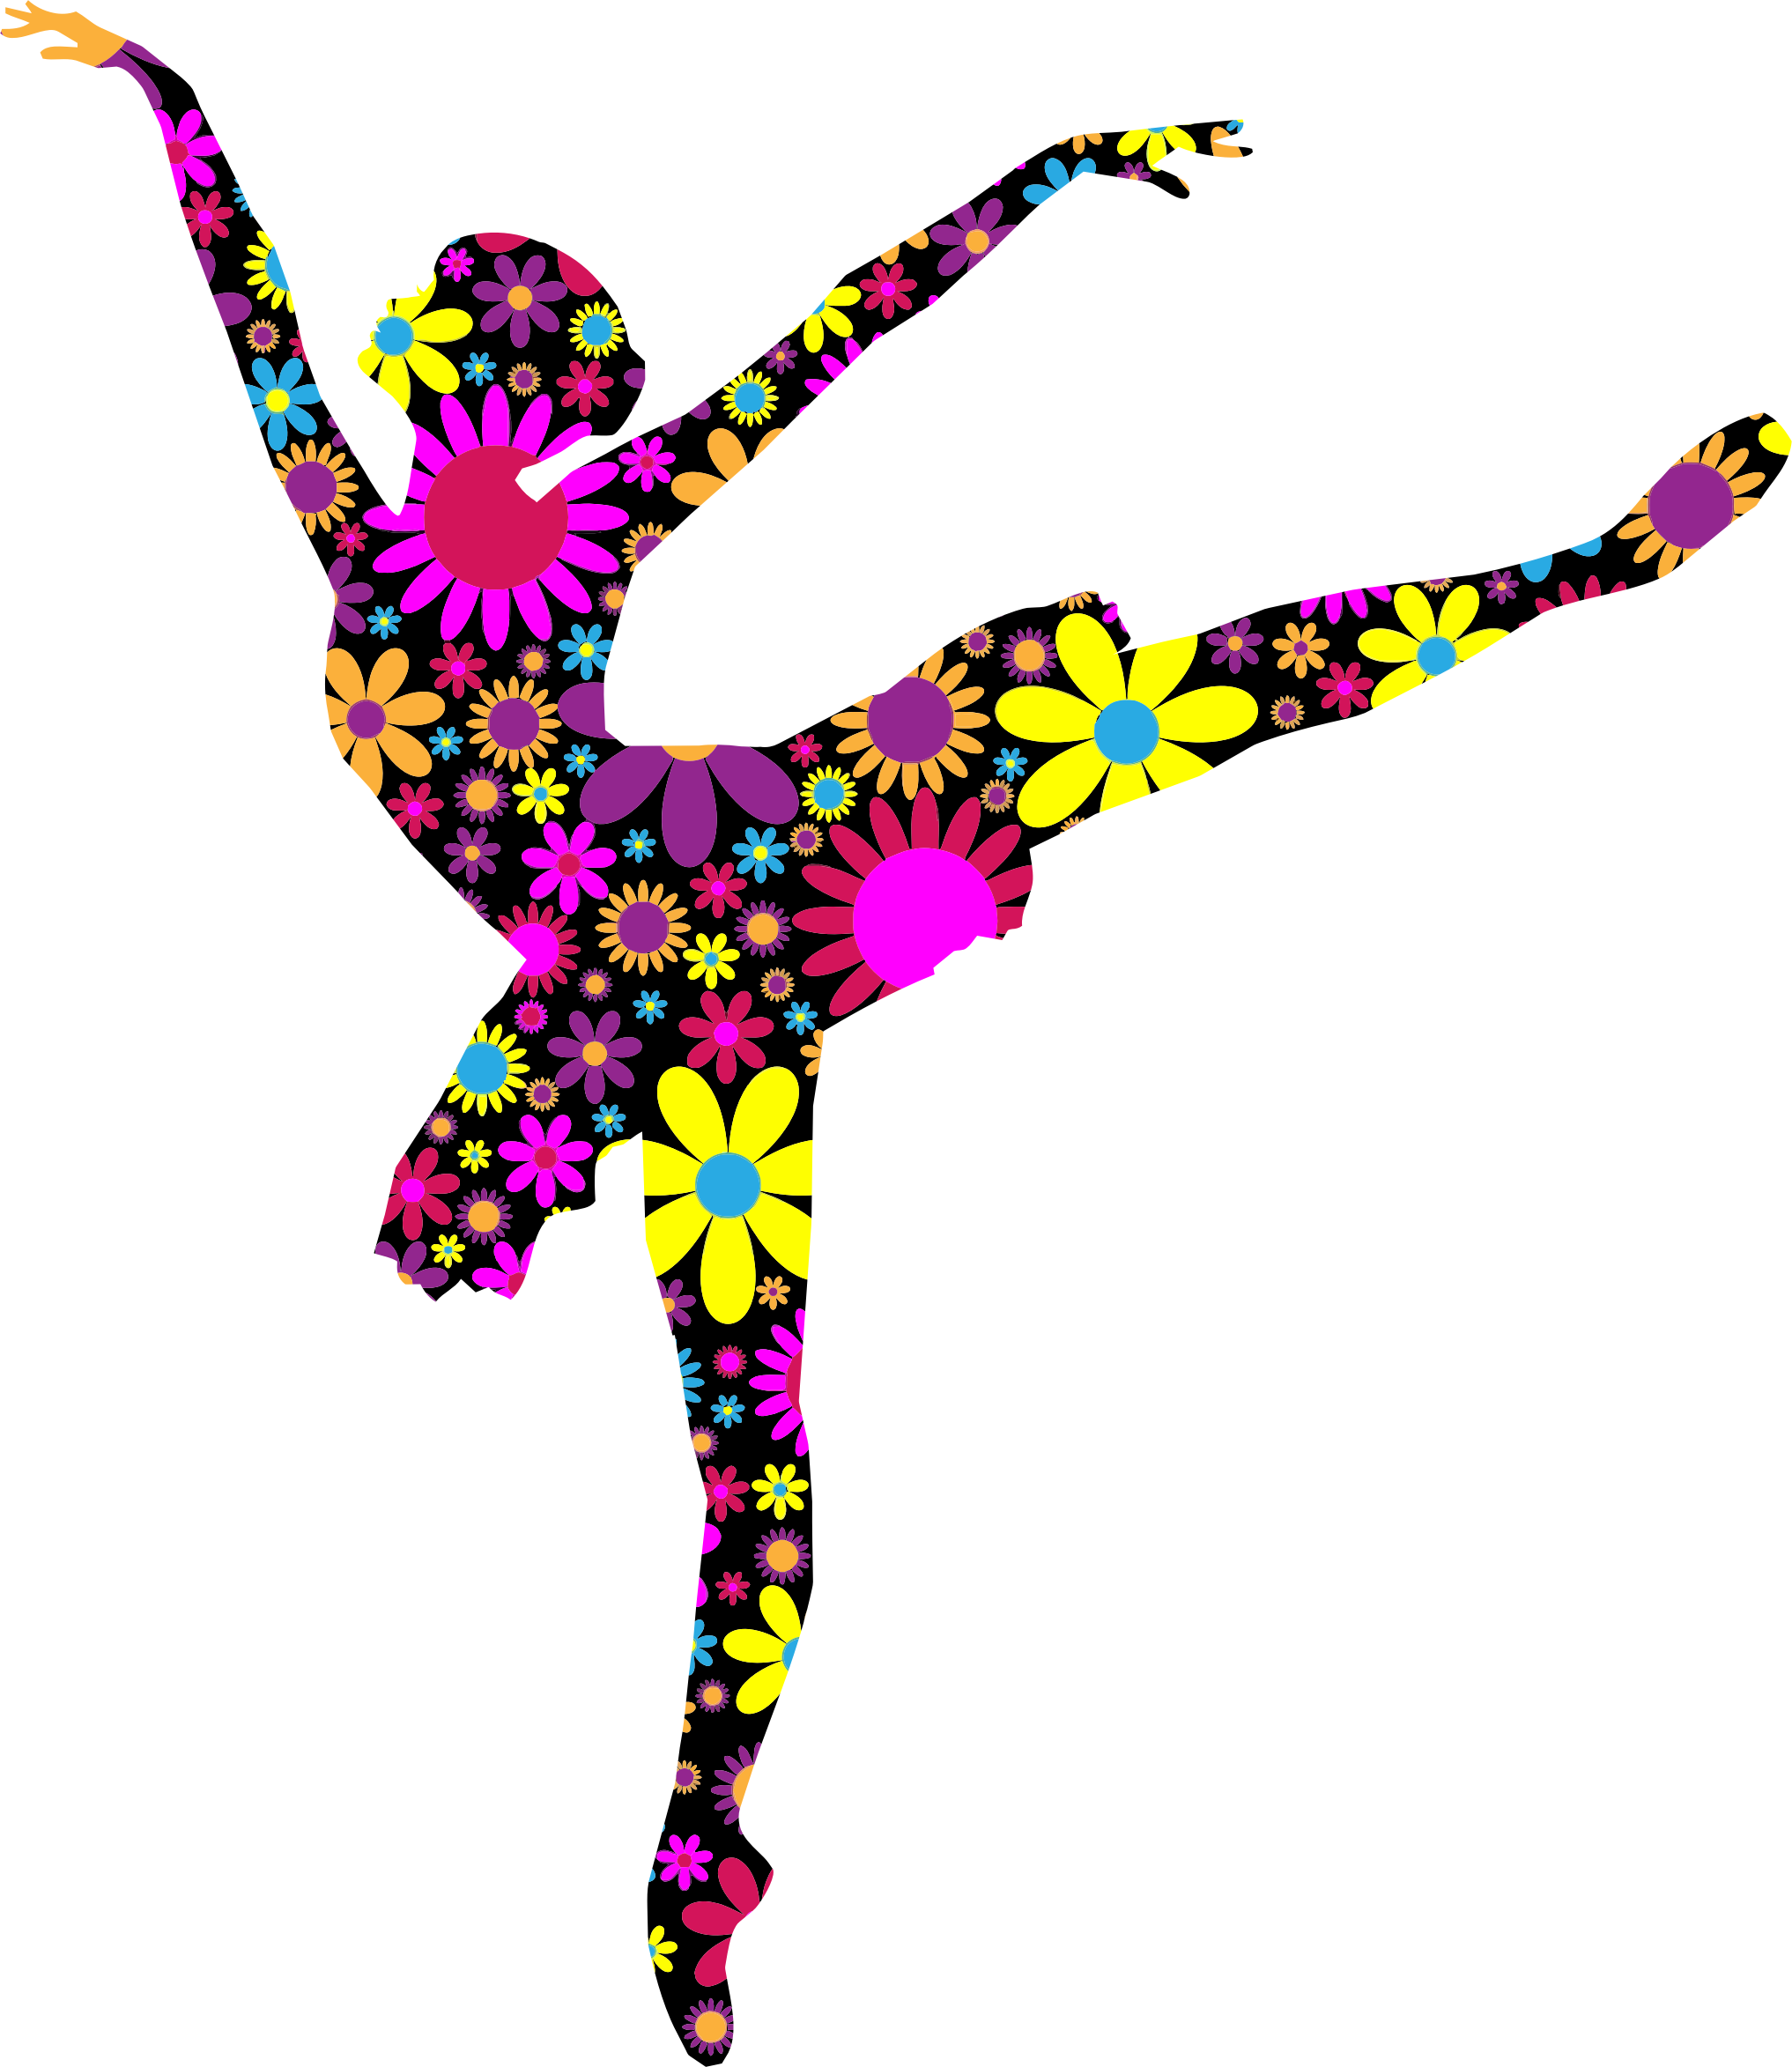 Floral Graceful Ballerina Silhouette By Gdj - Ballerina Dance Silhouette Png (2034x2346)